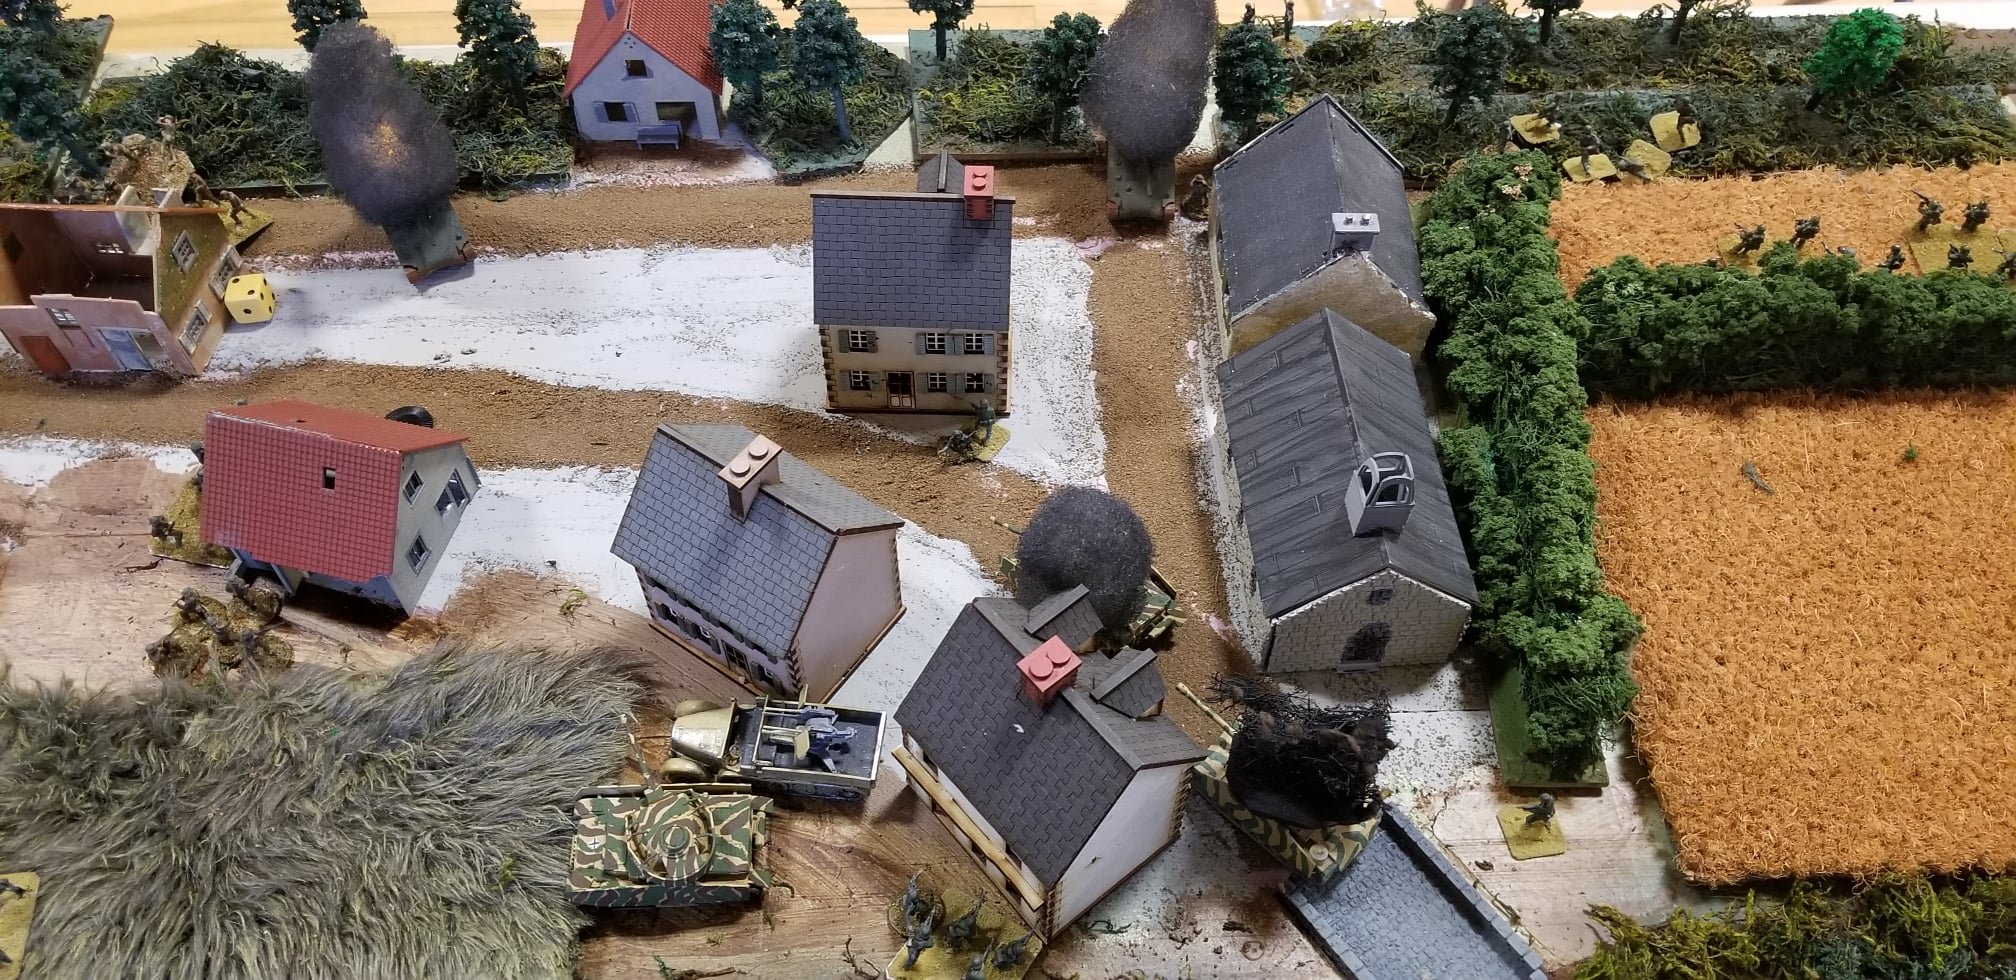 The close of the battle. With no armor left to fend off the Panzer IV and the SdKfz 7/1, the Canadians will have to retreat.